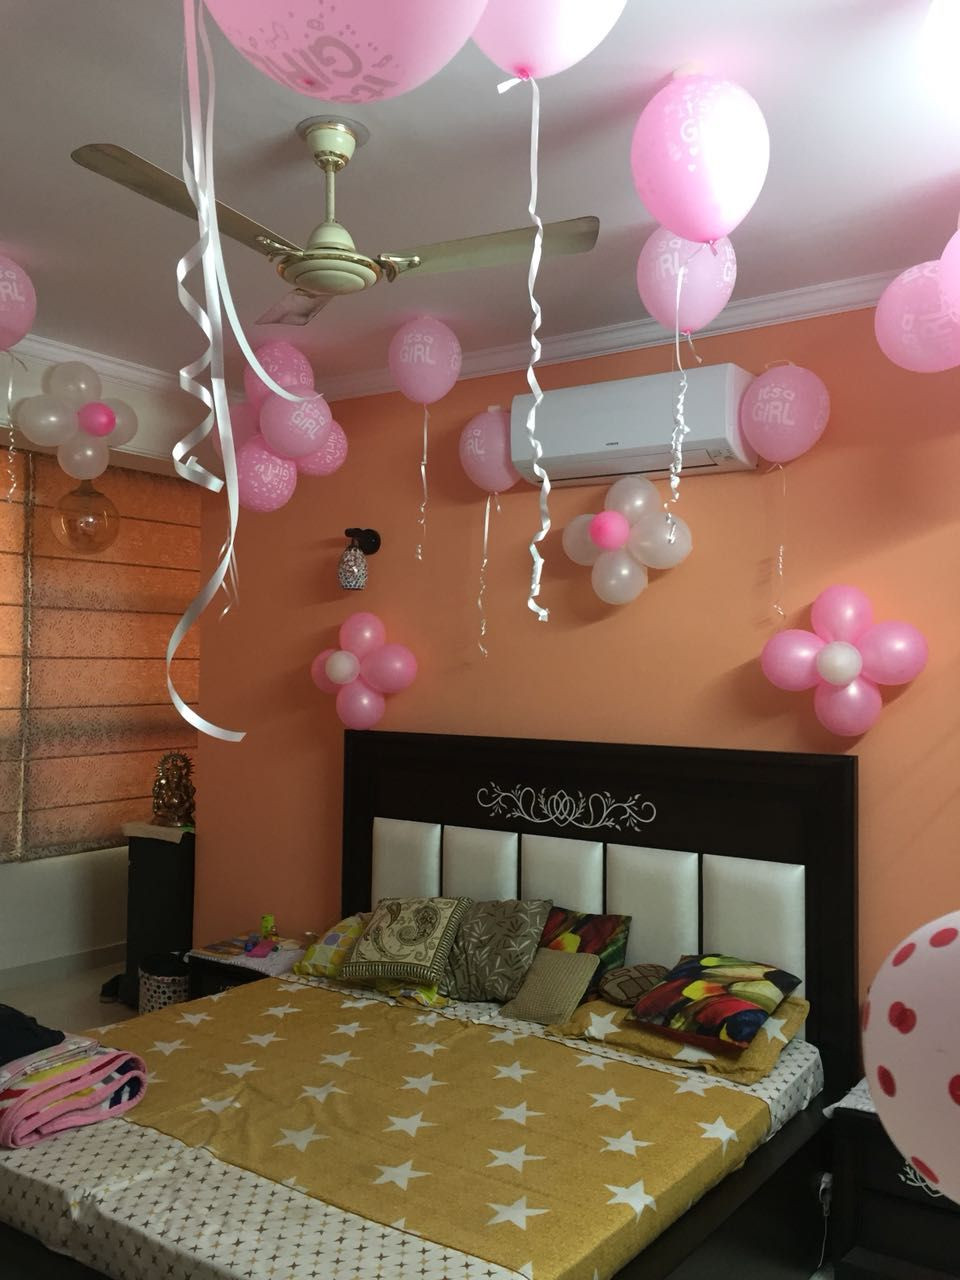 Baby Welcome Decoration Ideas
 1000 Newborn Baby decoration ideas you must consider